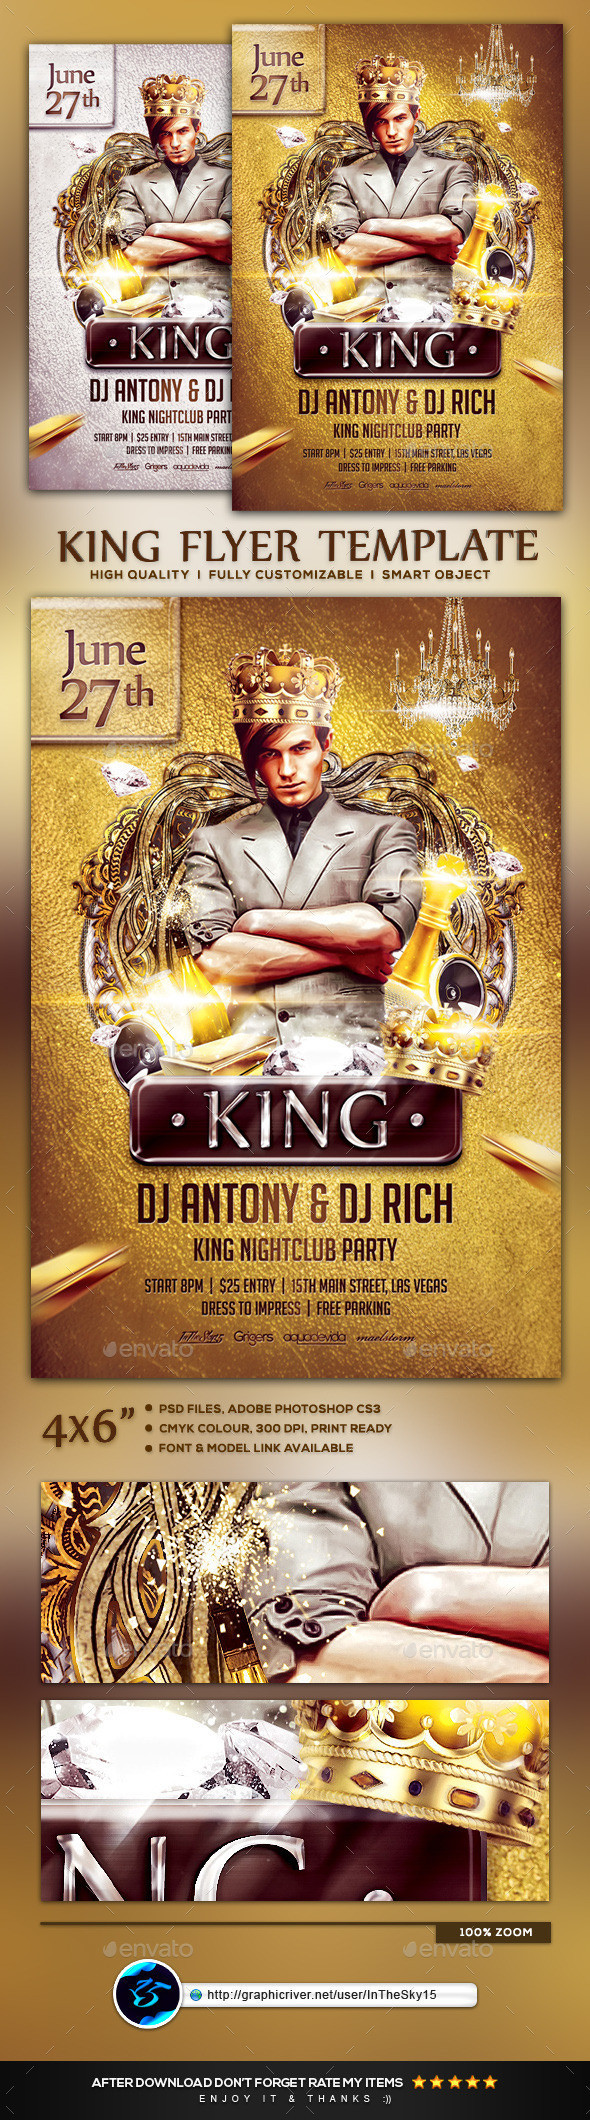 New 20preview 20king 20flyer 20template 20